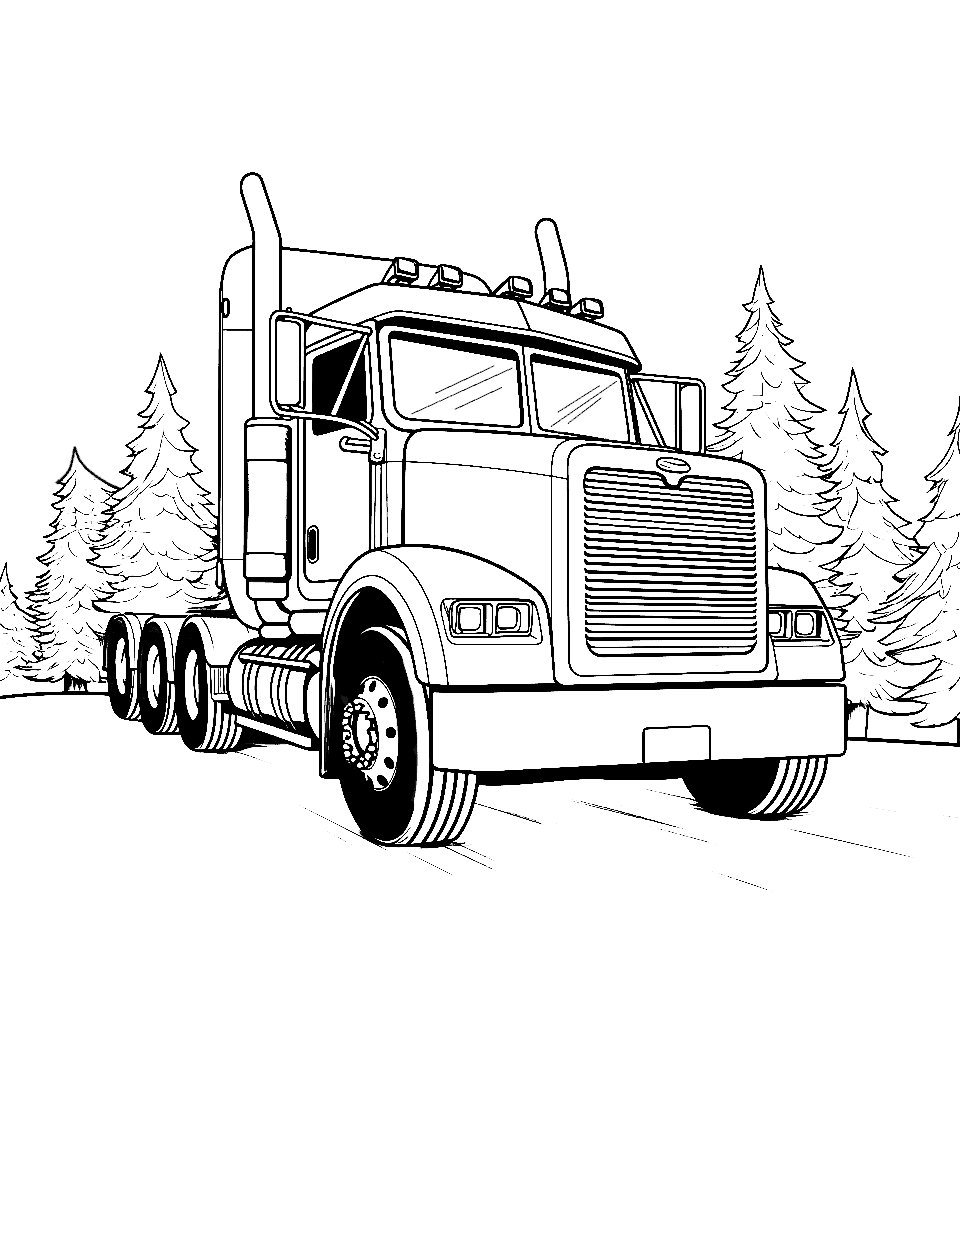 Semi Truck at Rest Area Coloring Page - A semi-truck parked in a rest area.